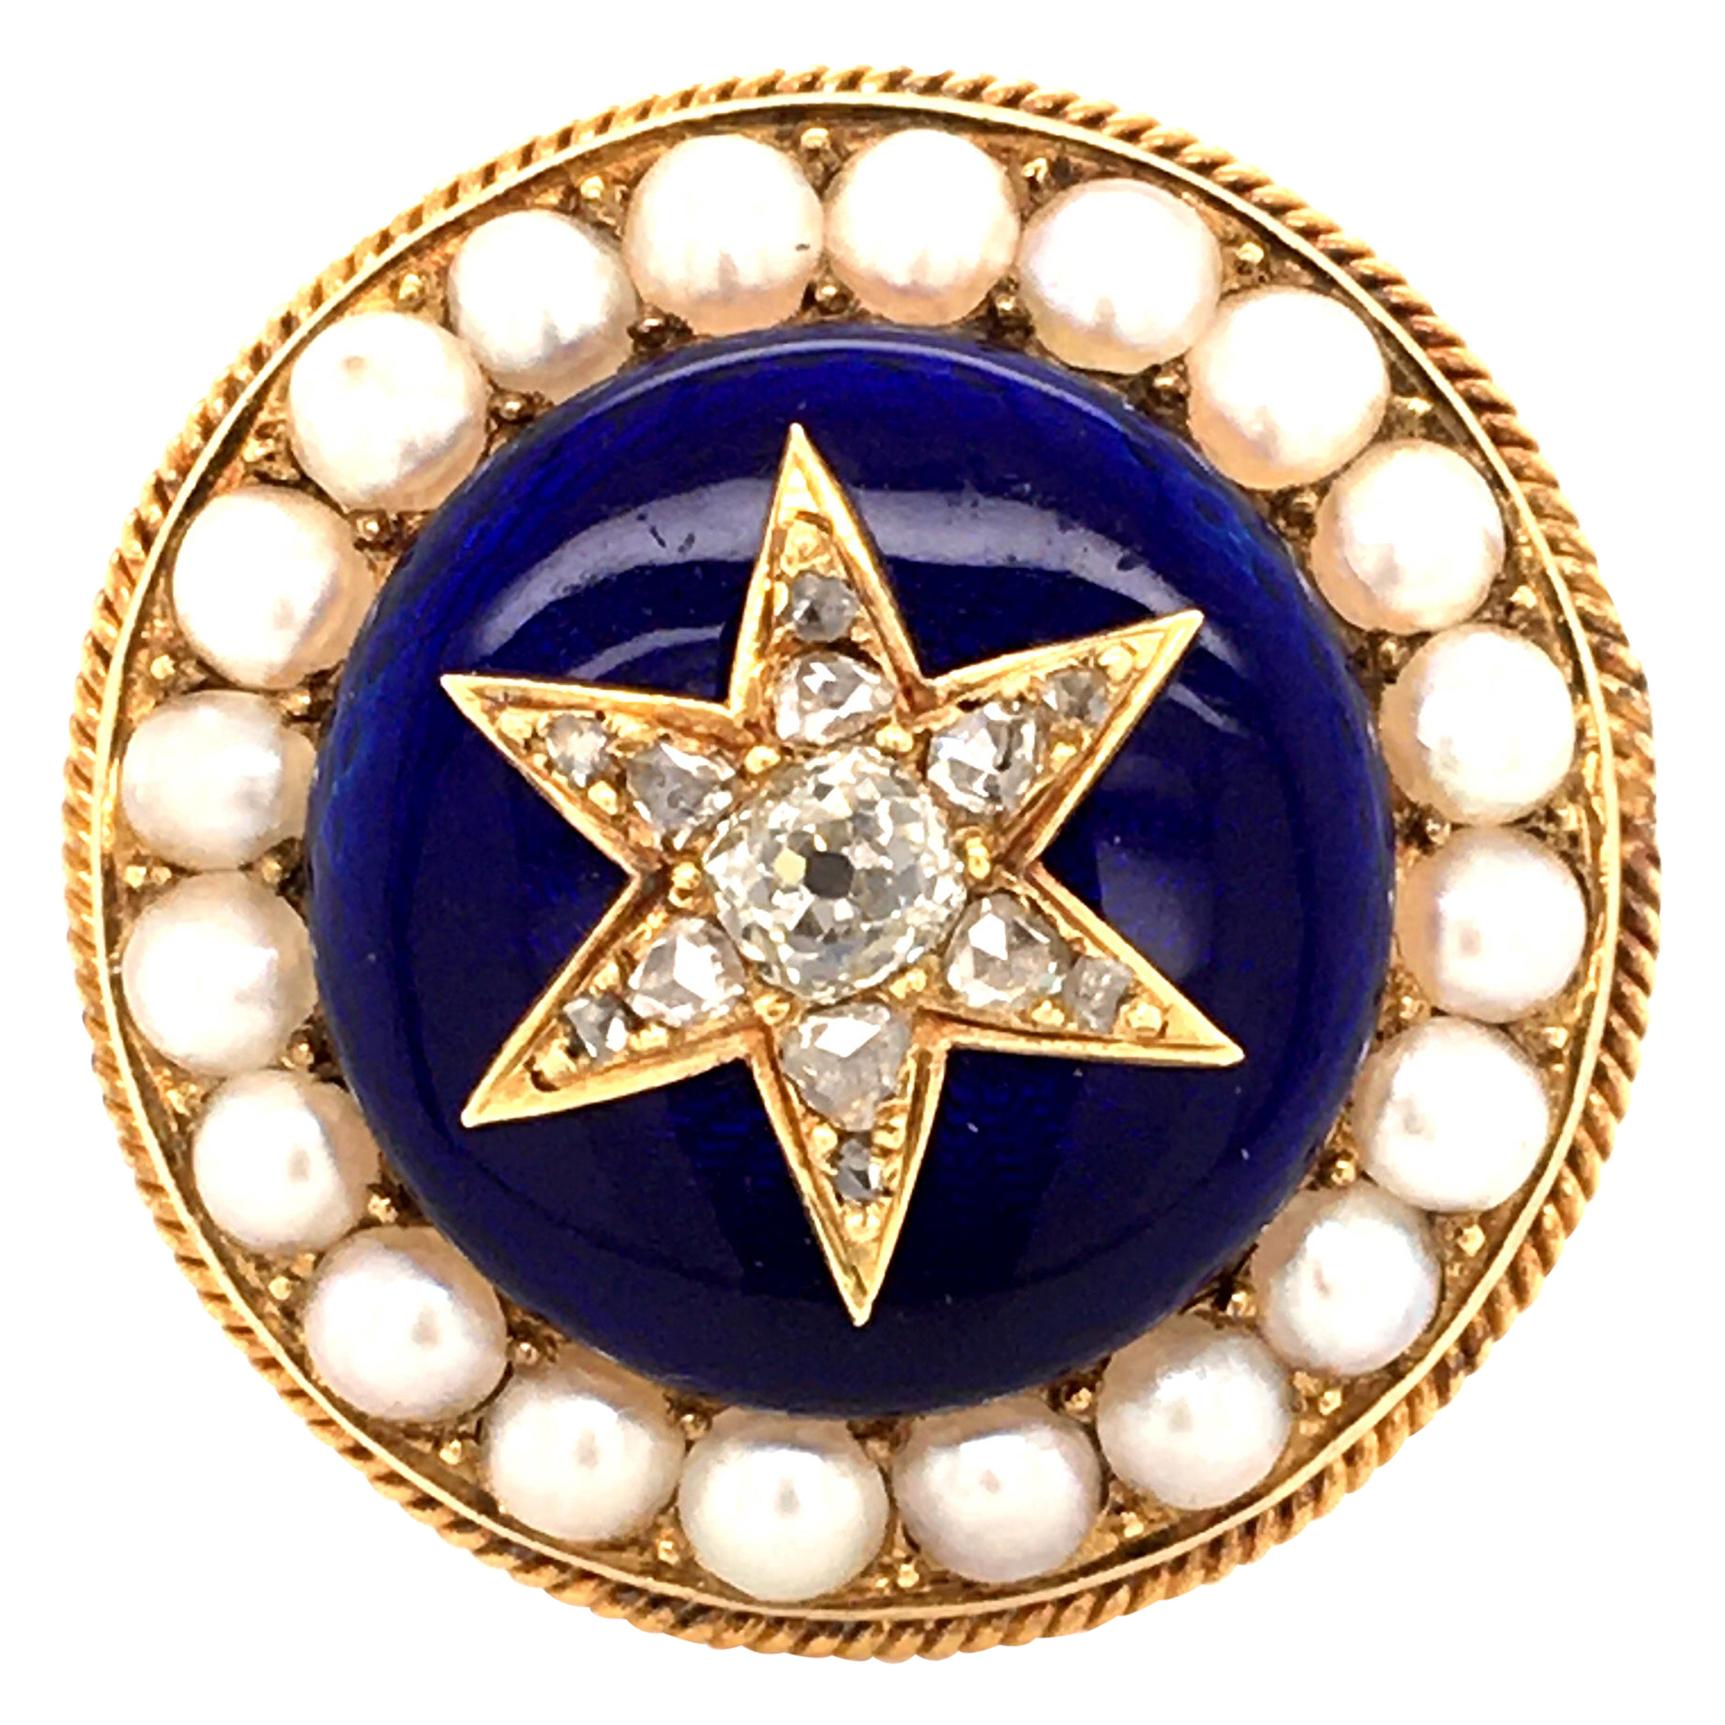 Antique Diamond and Enamel Brooch with Half-Pearls in 14 Karat Yellow Gold